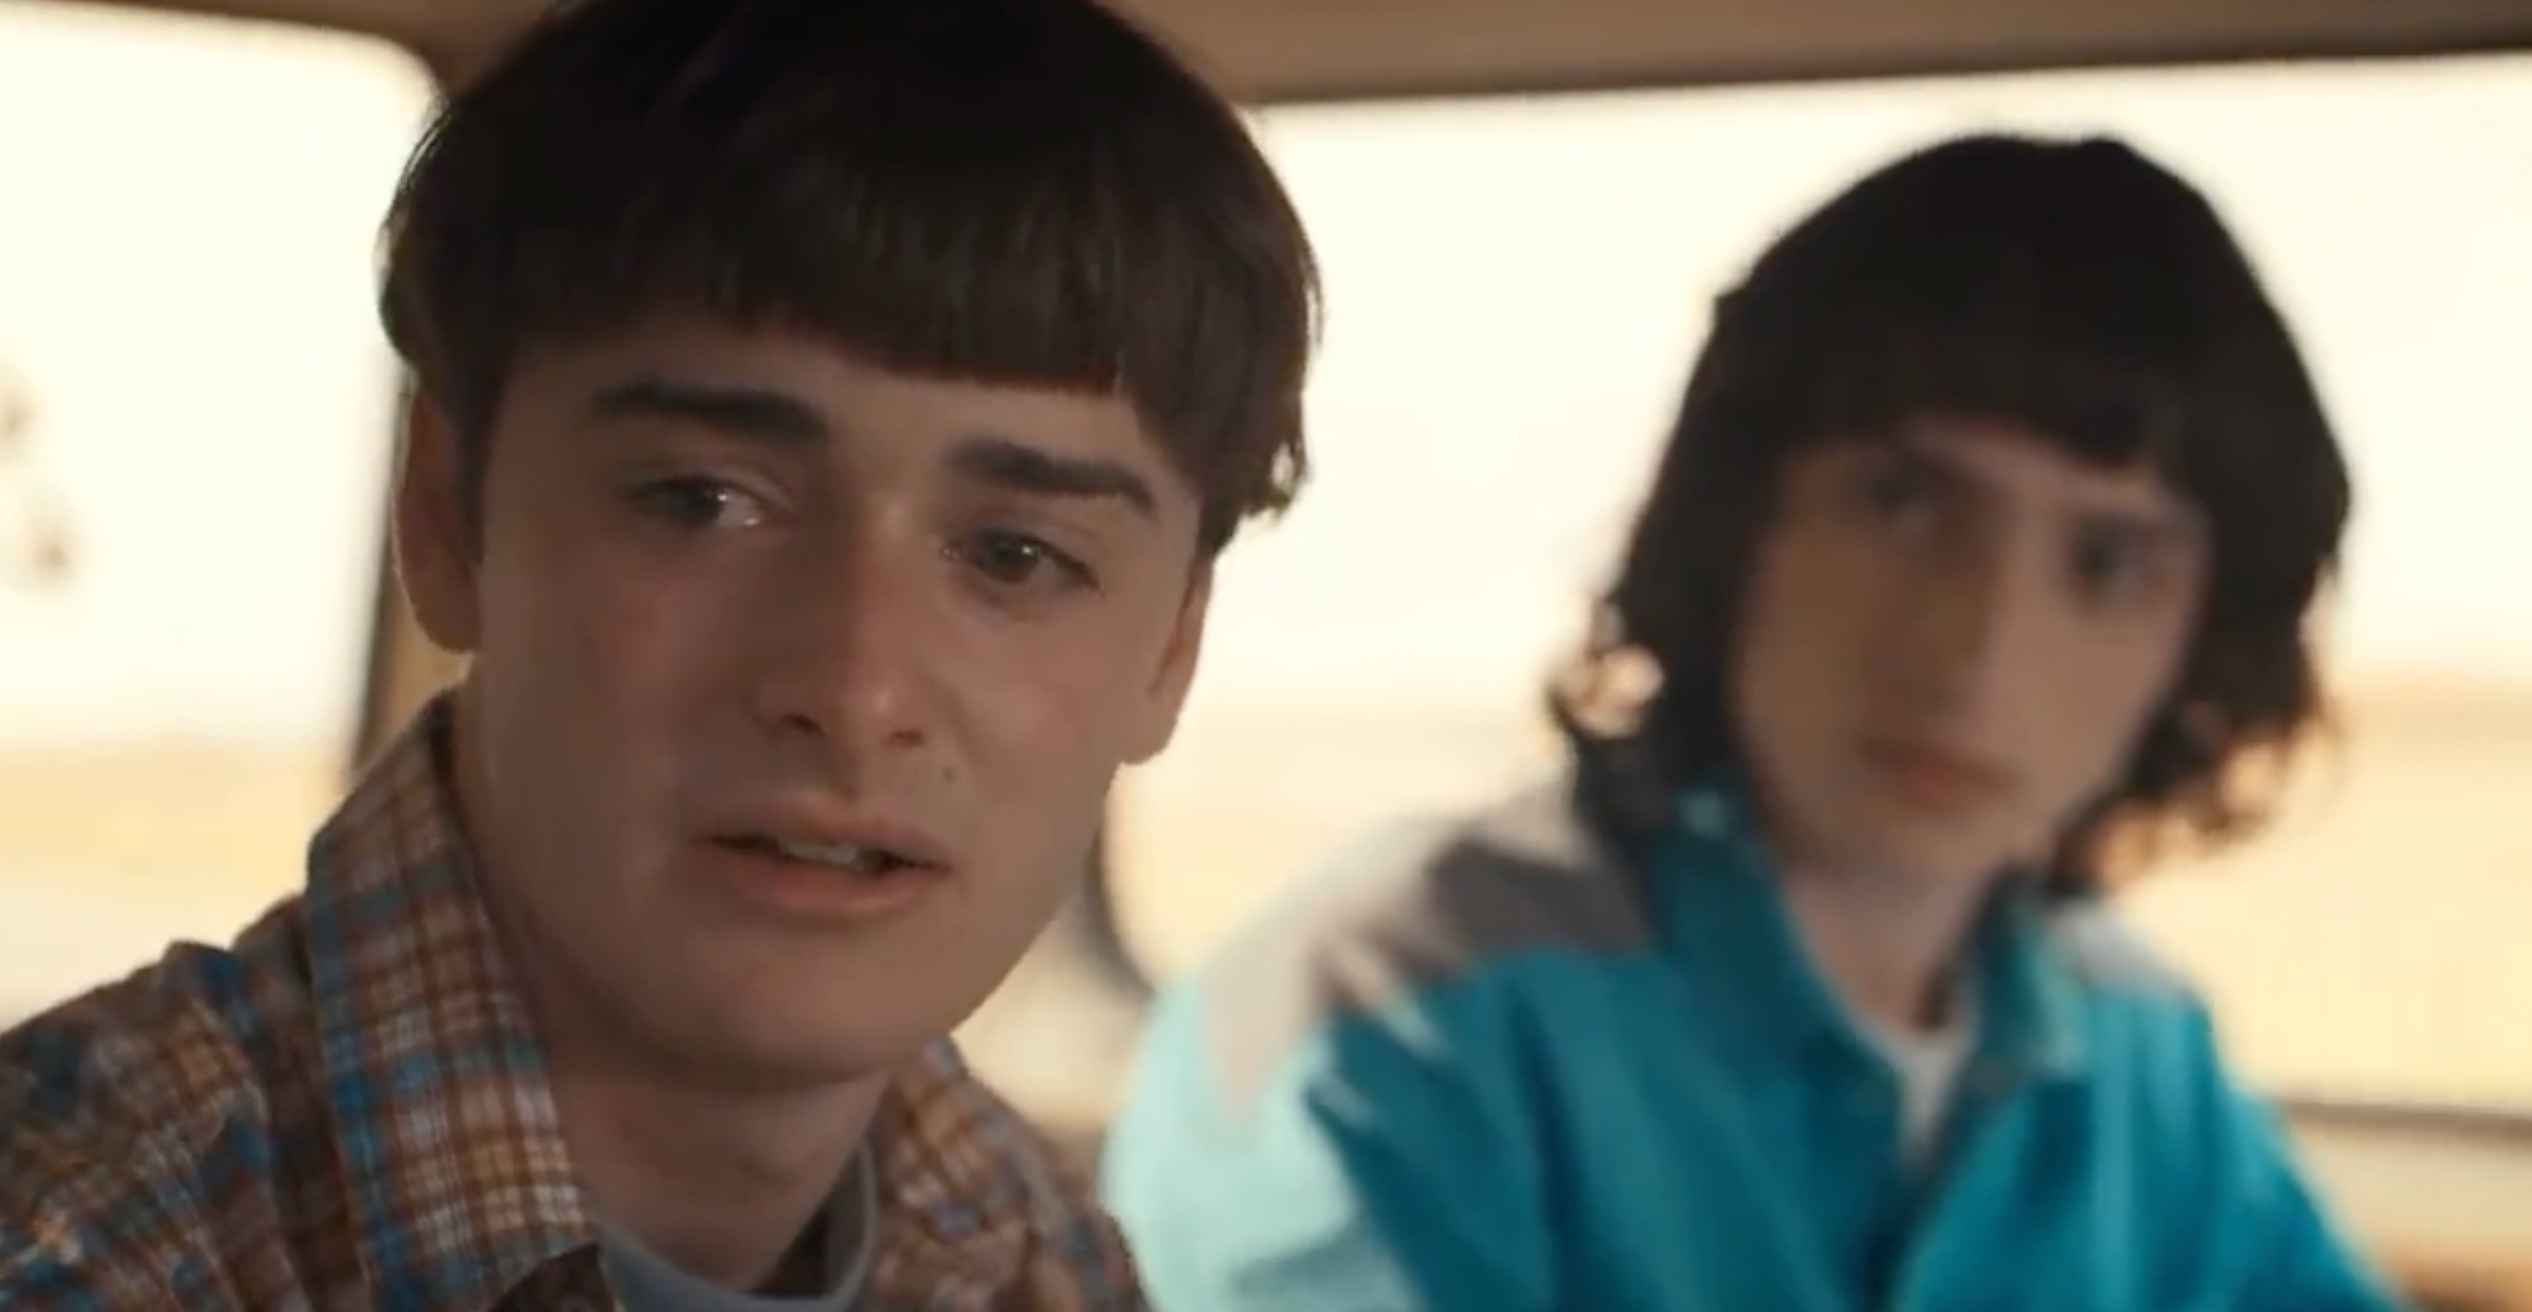 Is Will Byers gay? Twitter is divided after Stranger Things Season 3 moment